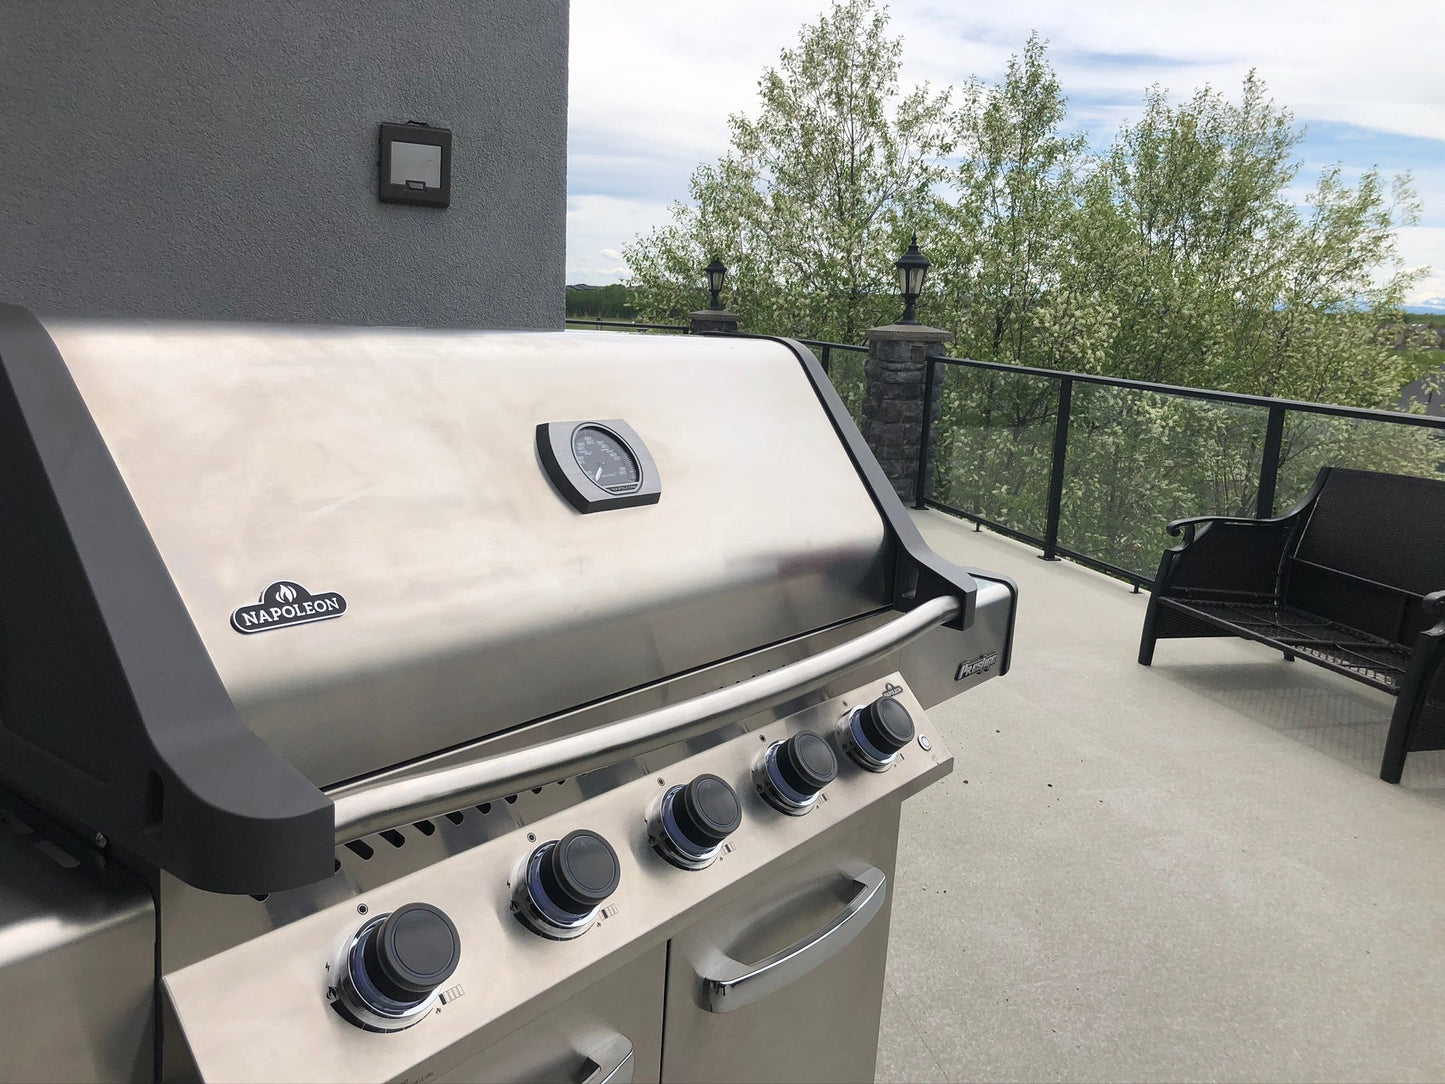 Napoleon P665 Stainless Steel Grill - Natural Gas | Lots of space for lots of food, this grill is the ultimate tool to big cookouts this summer | Barbecues Galore: Burlington, Oakville, Etobicoke & Calgary